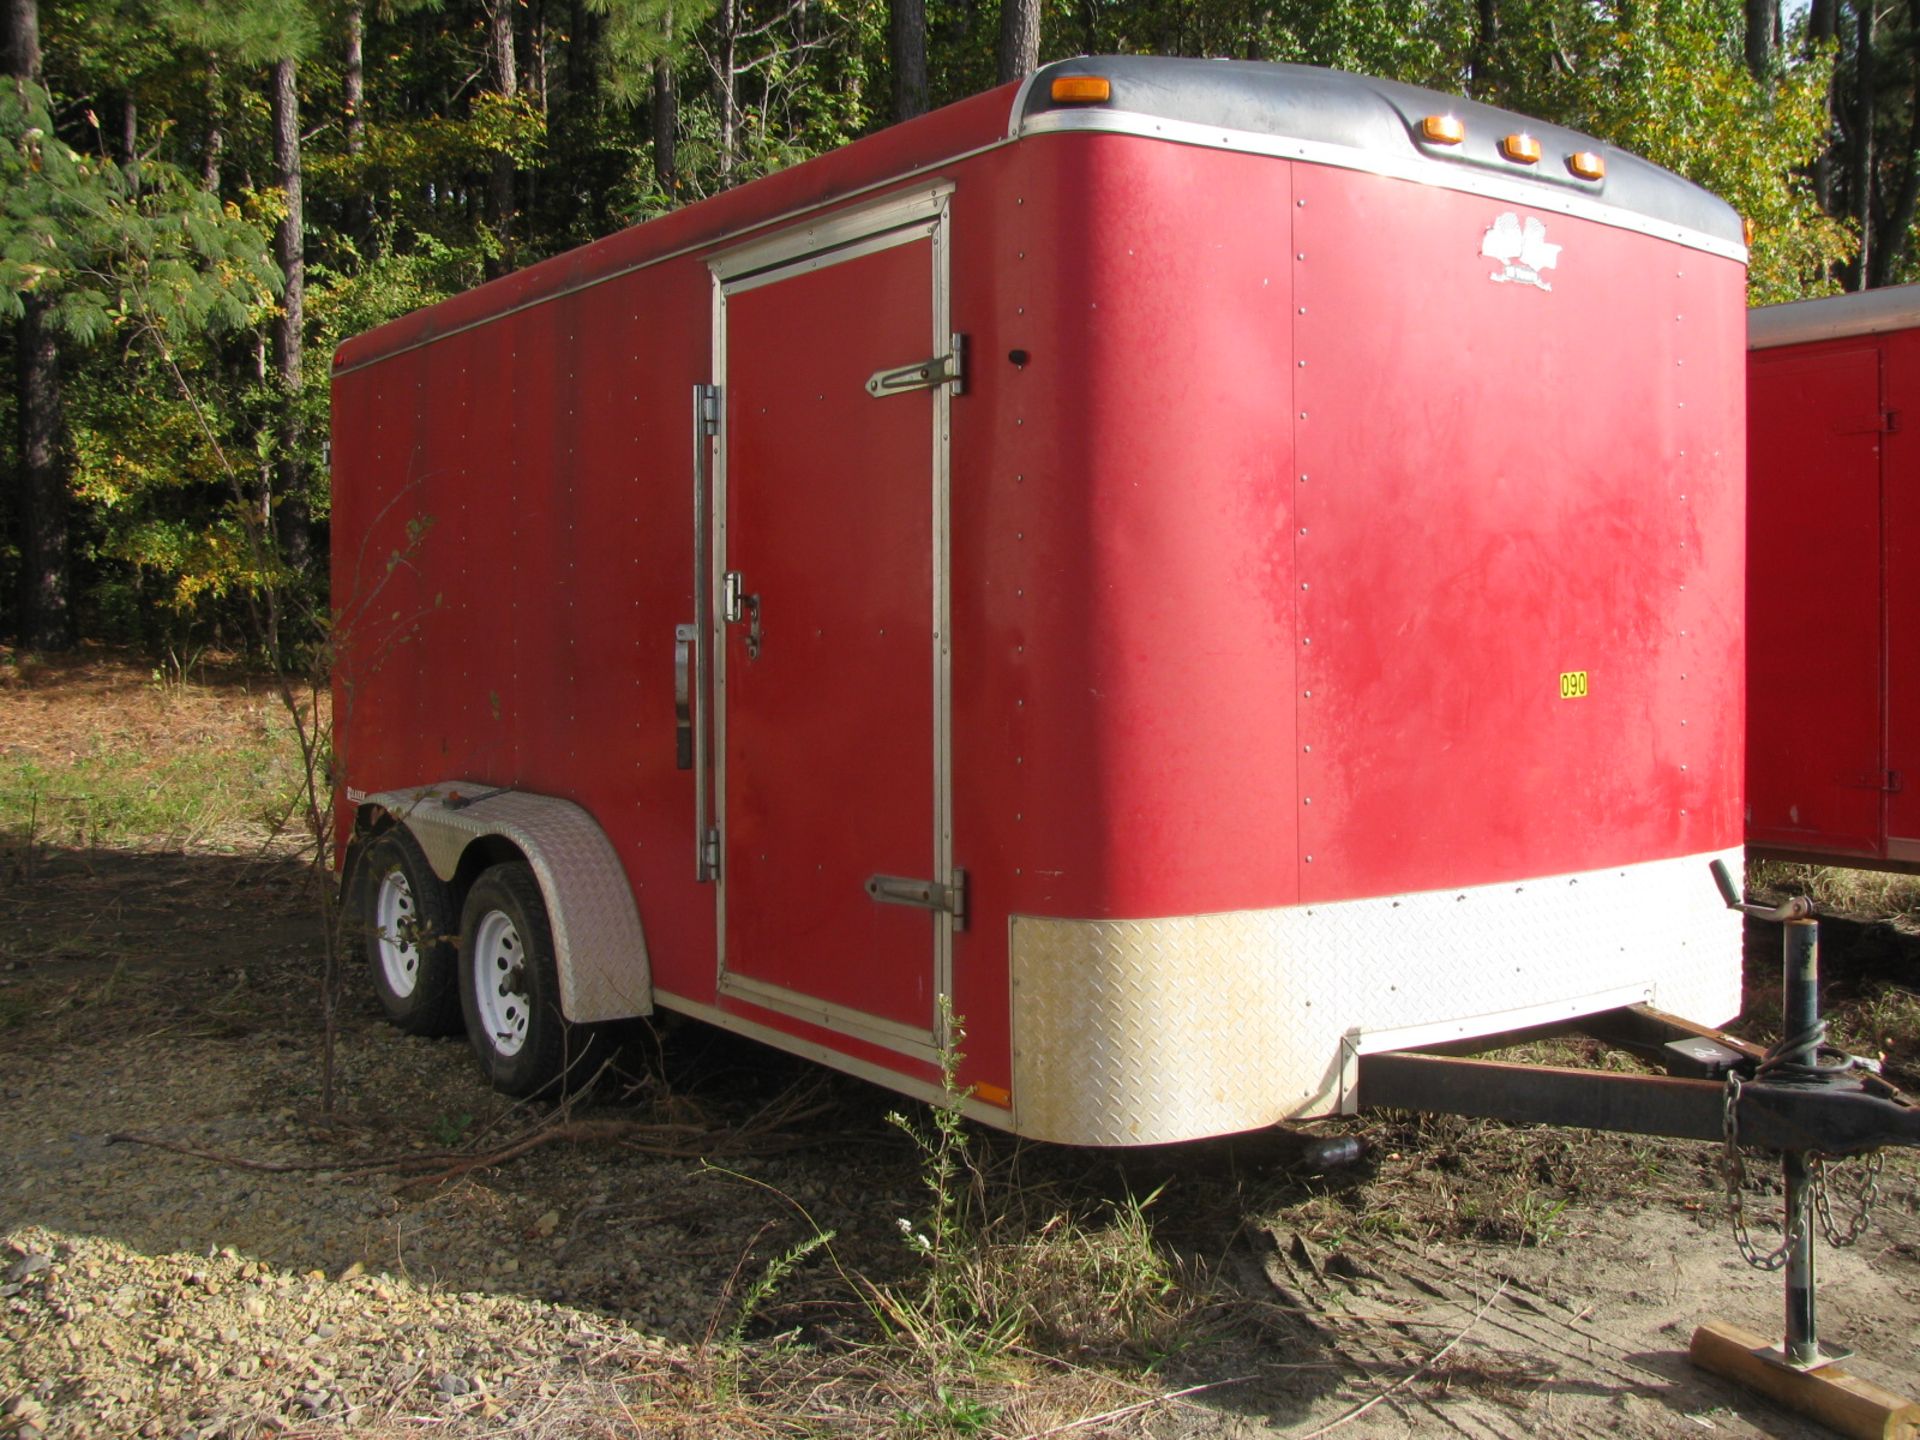 2007 Cargo Mate 16' Enclosed Trailer Vin# 5NHUBLY248Y057434, Mfg Forest River Inc